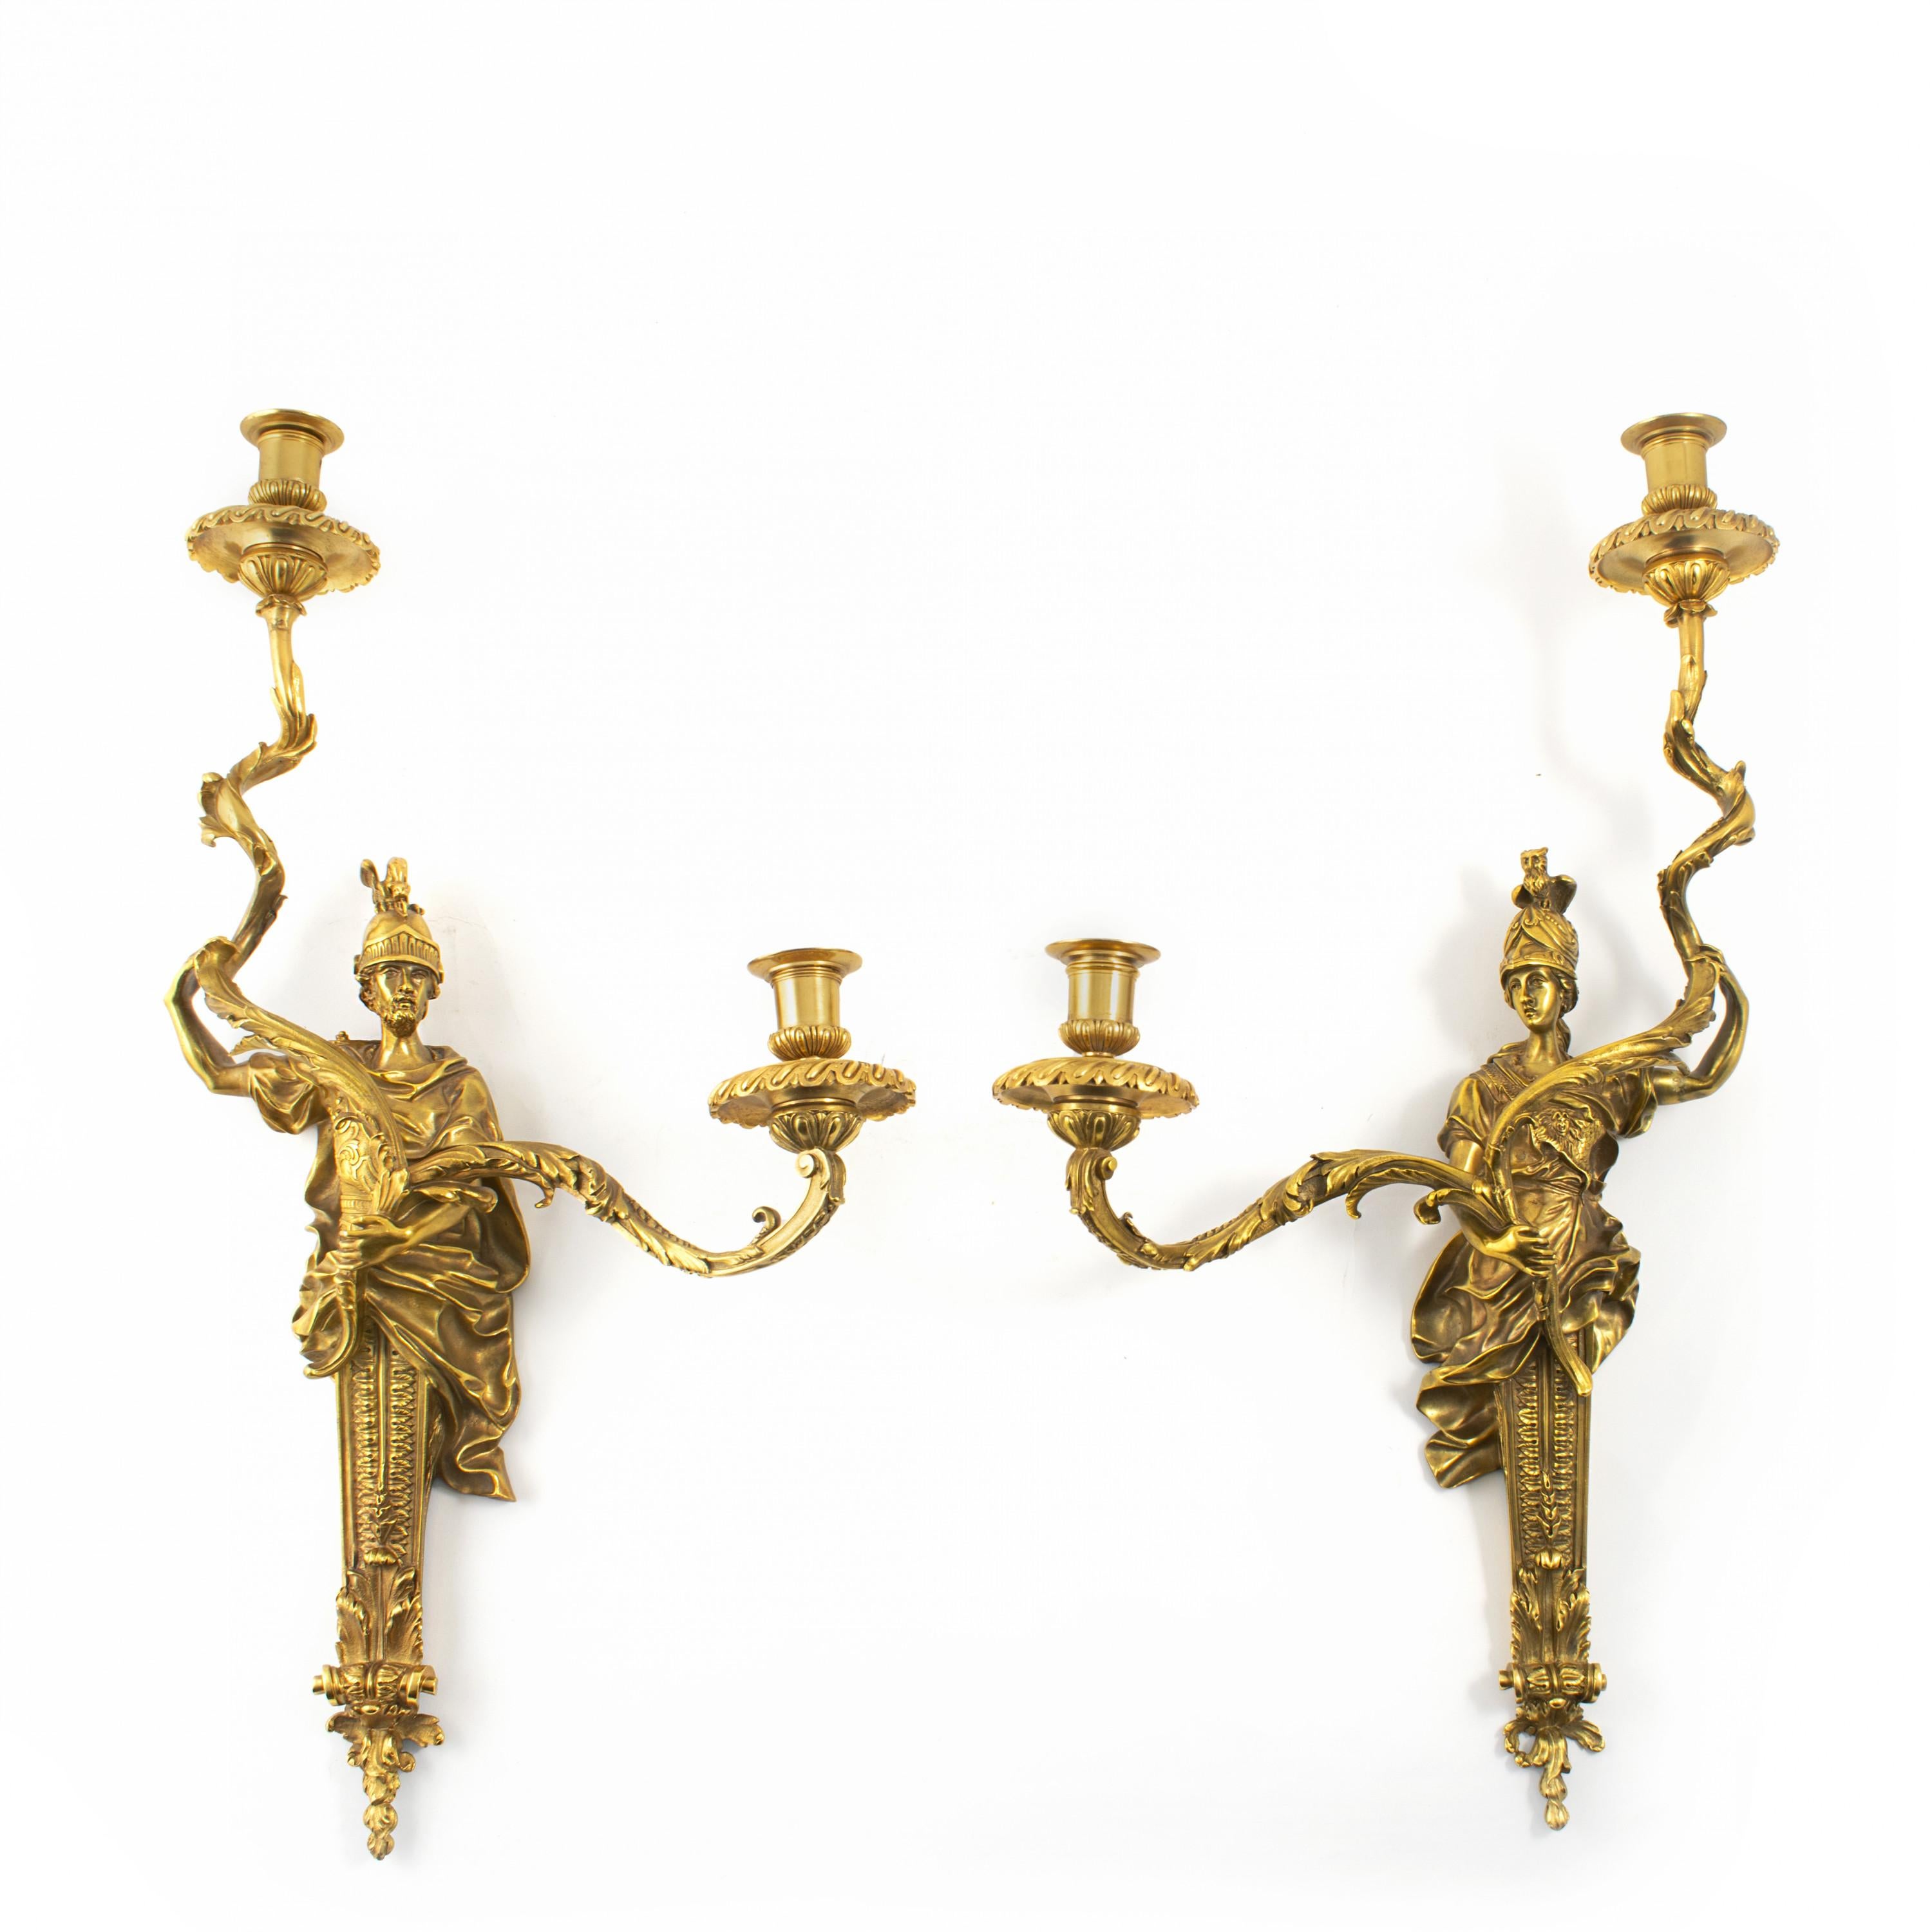 A refined set of four French Louis XVI style gilt bronze wall lamps.
Made in France in the late 19th century by Henri Vian.
High quality.
Each fitted with two lights held by a bronze sculpture.
Measure: Height: 61 cm.
Sold as a set of four.